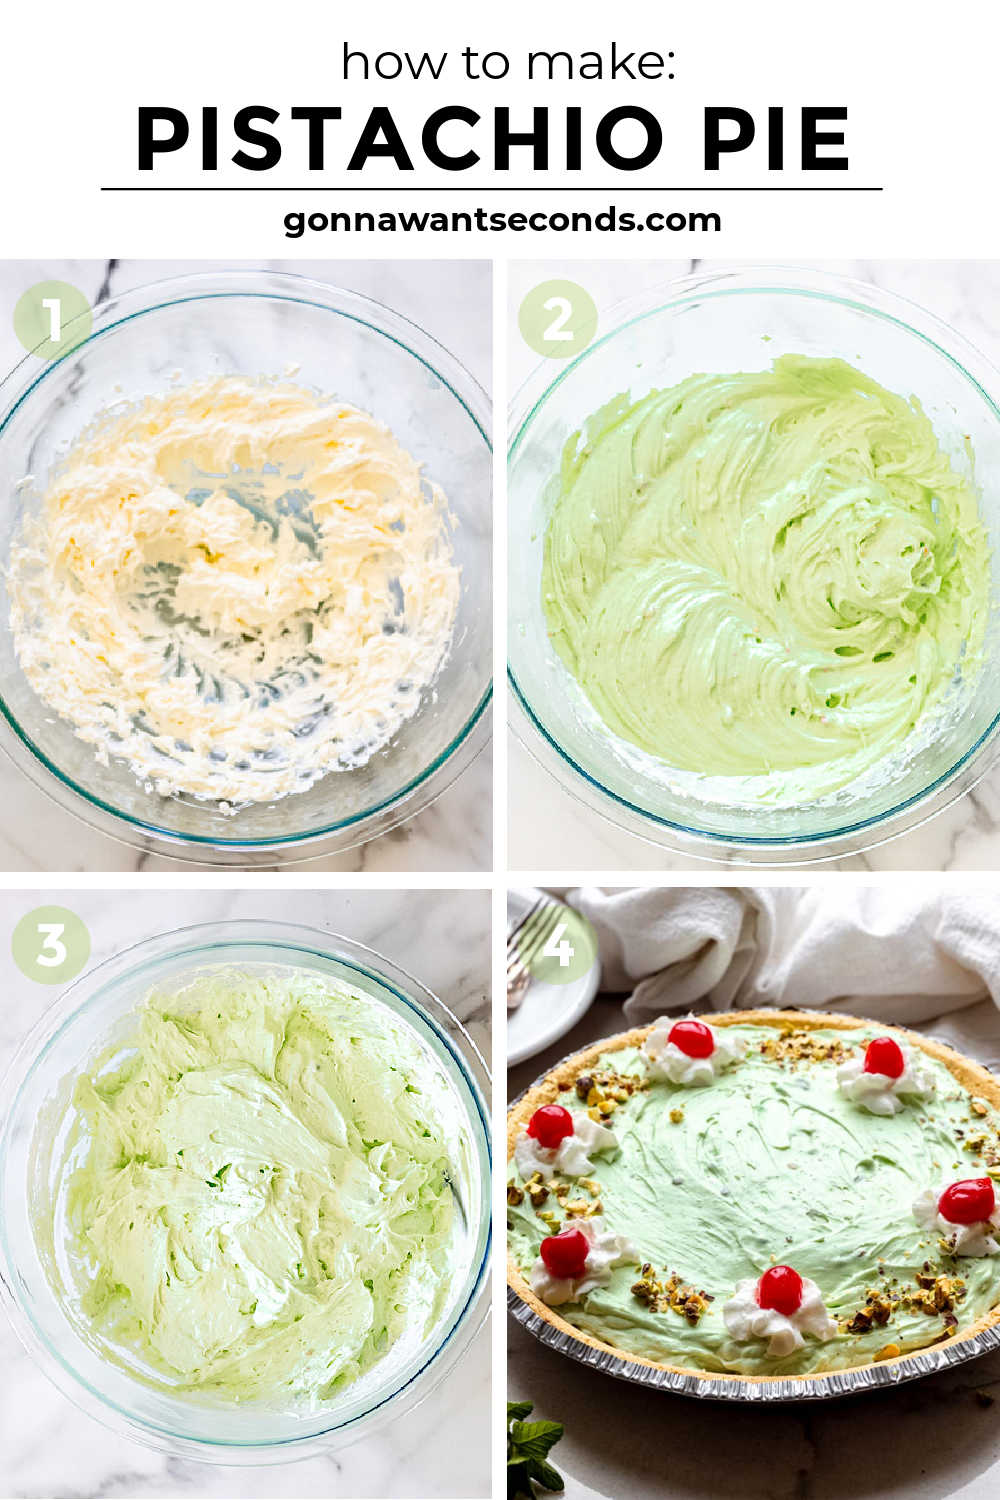 step by step how to make pistachio pie